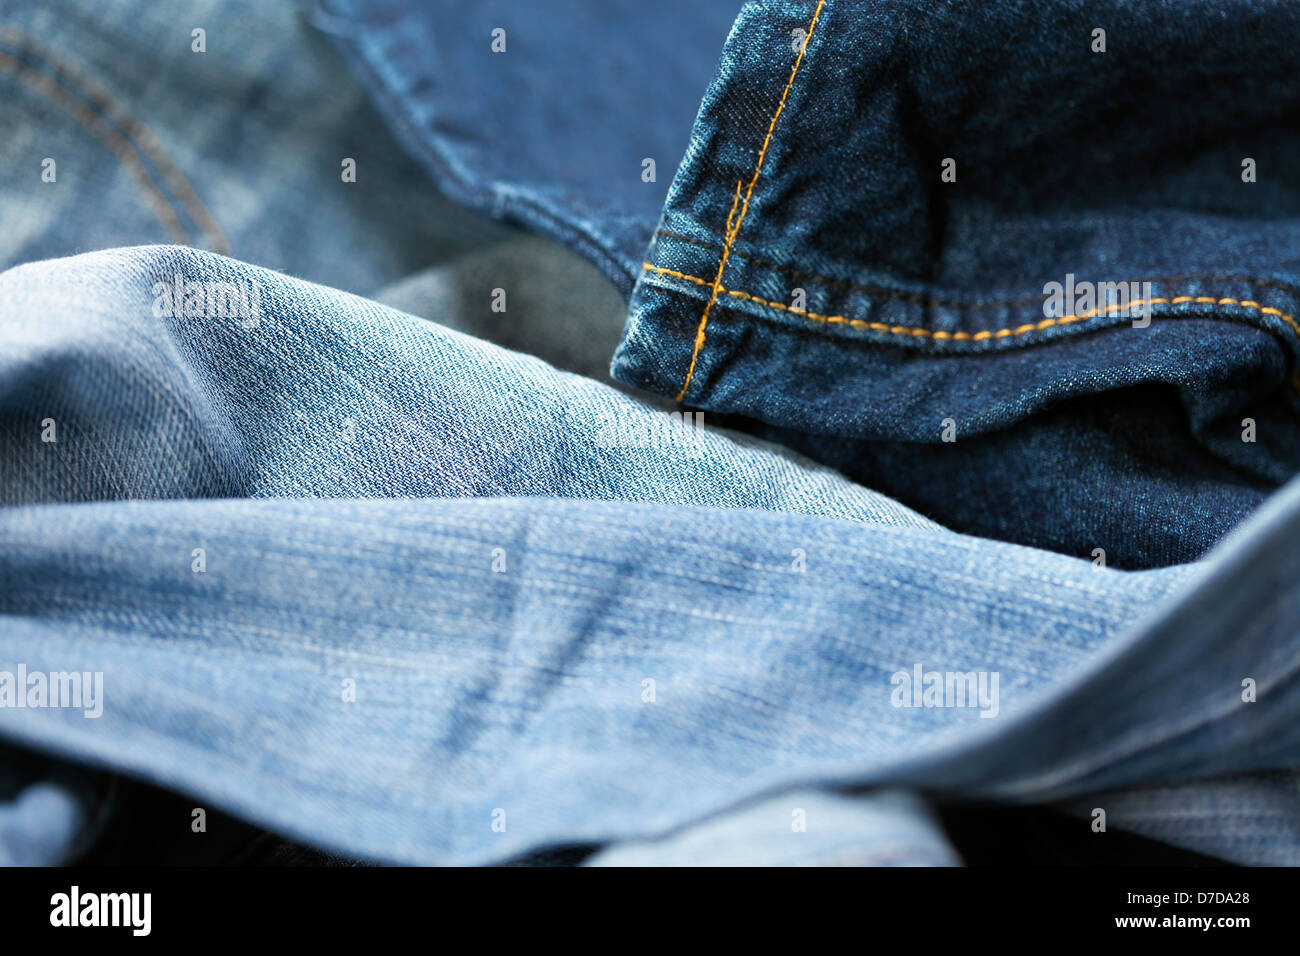 Macro view of a detail from a pair of blue jeans, on the blurry ...